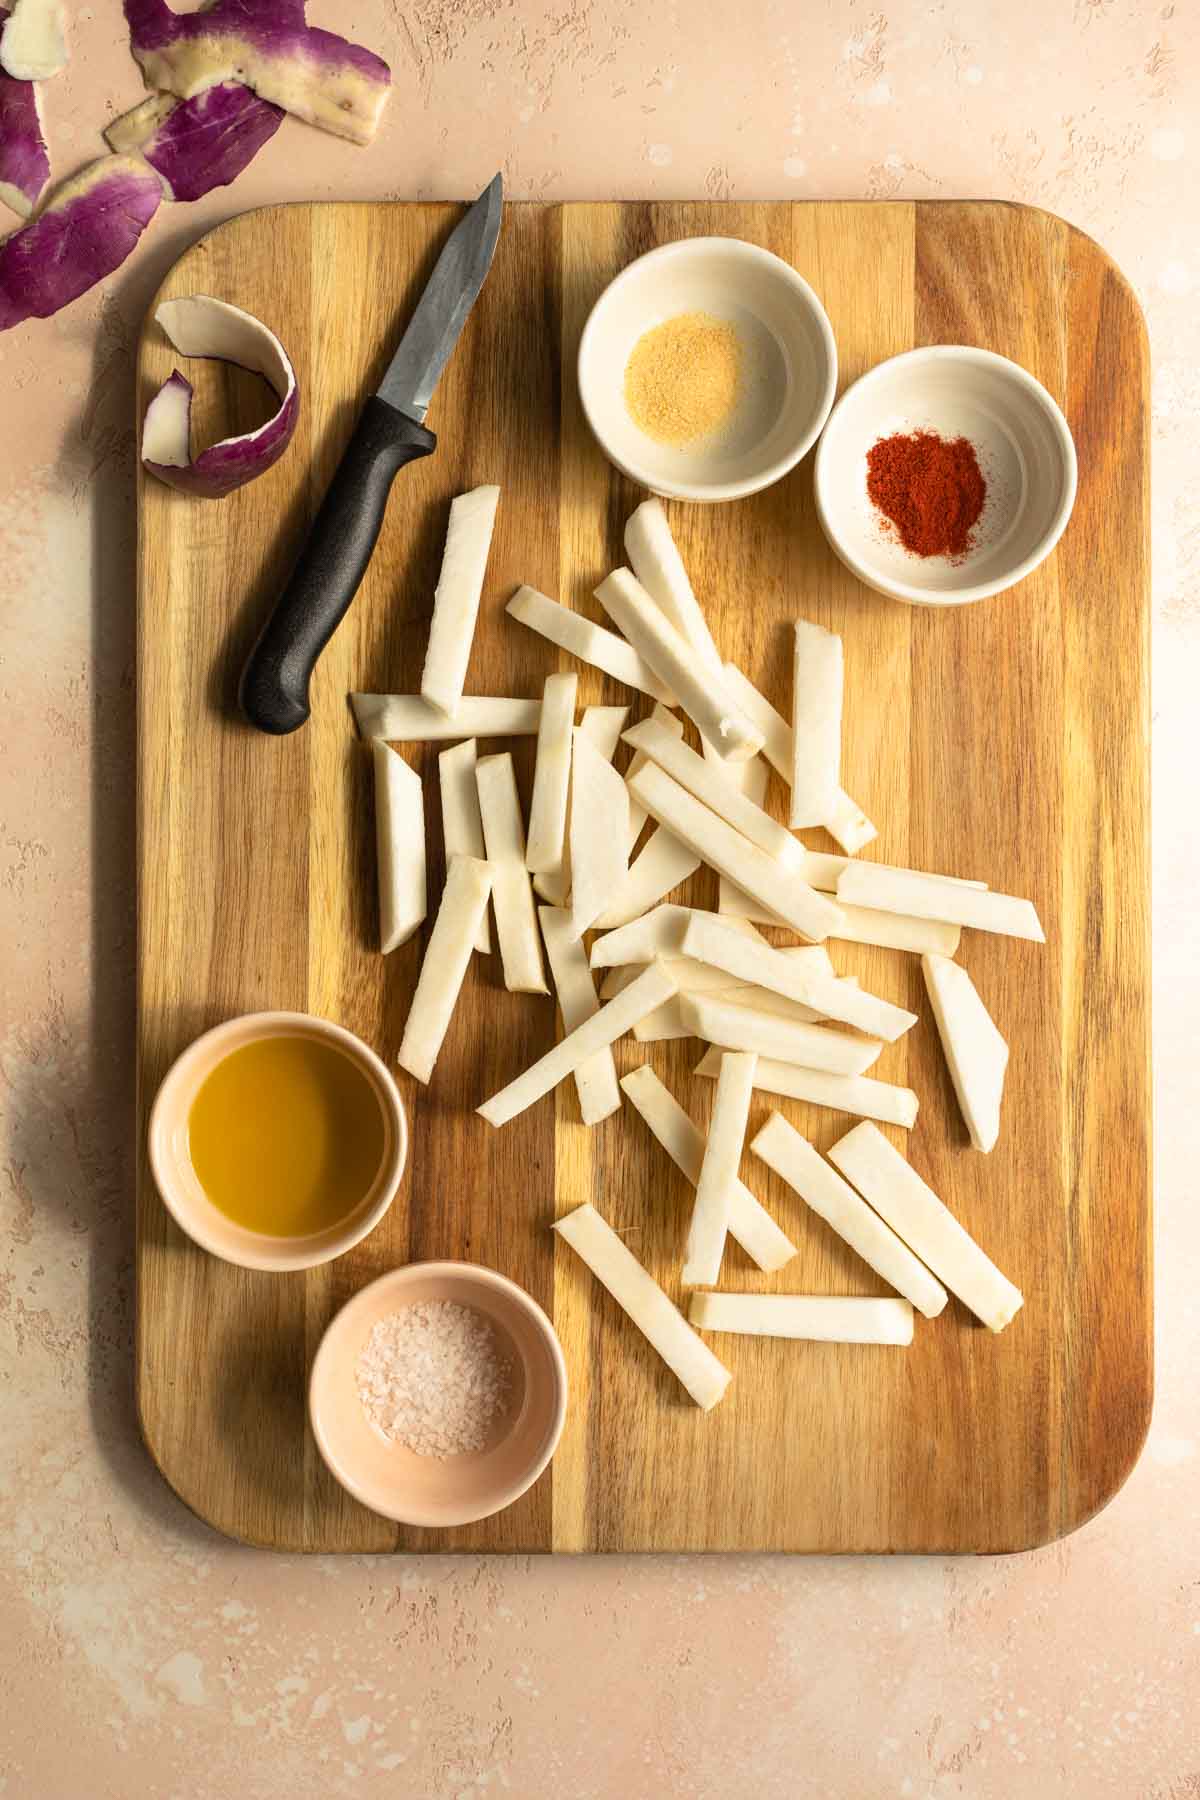 Raw turnip fries on a wooden cutting board with dishes of oil and seasonings on the side.